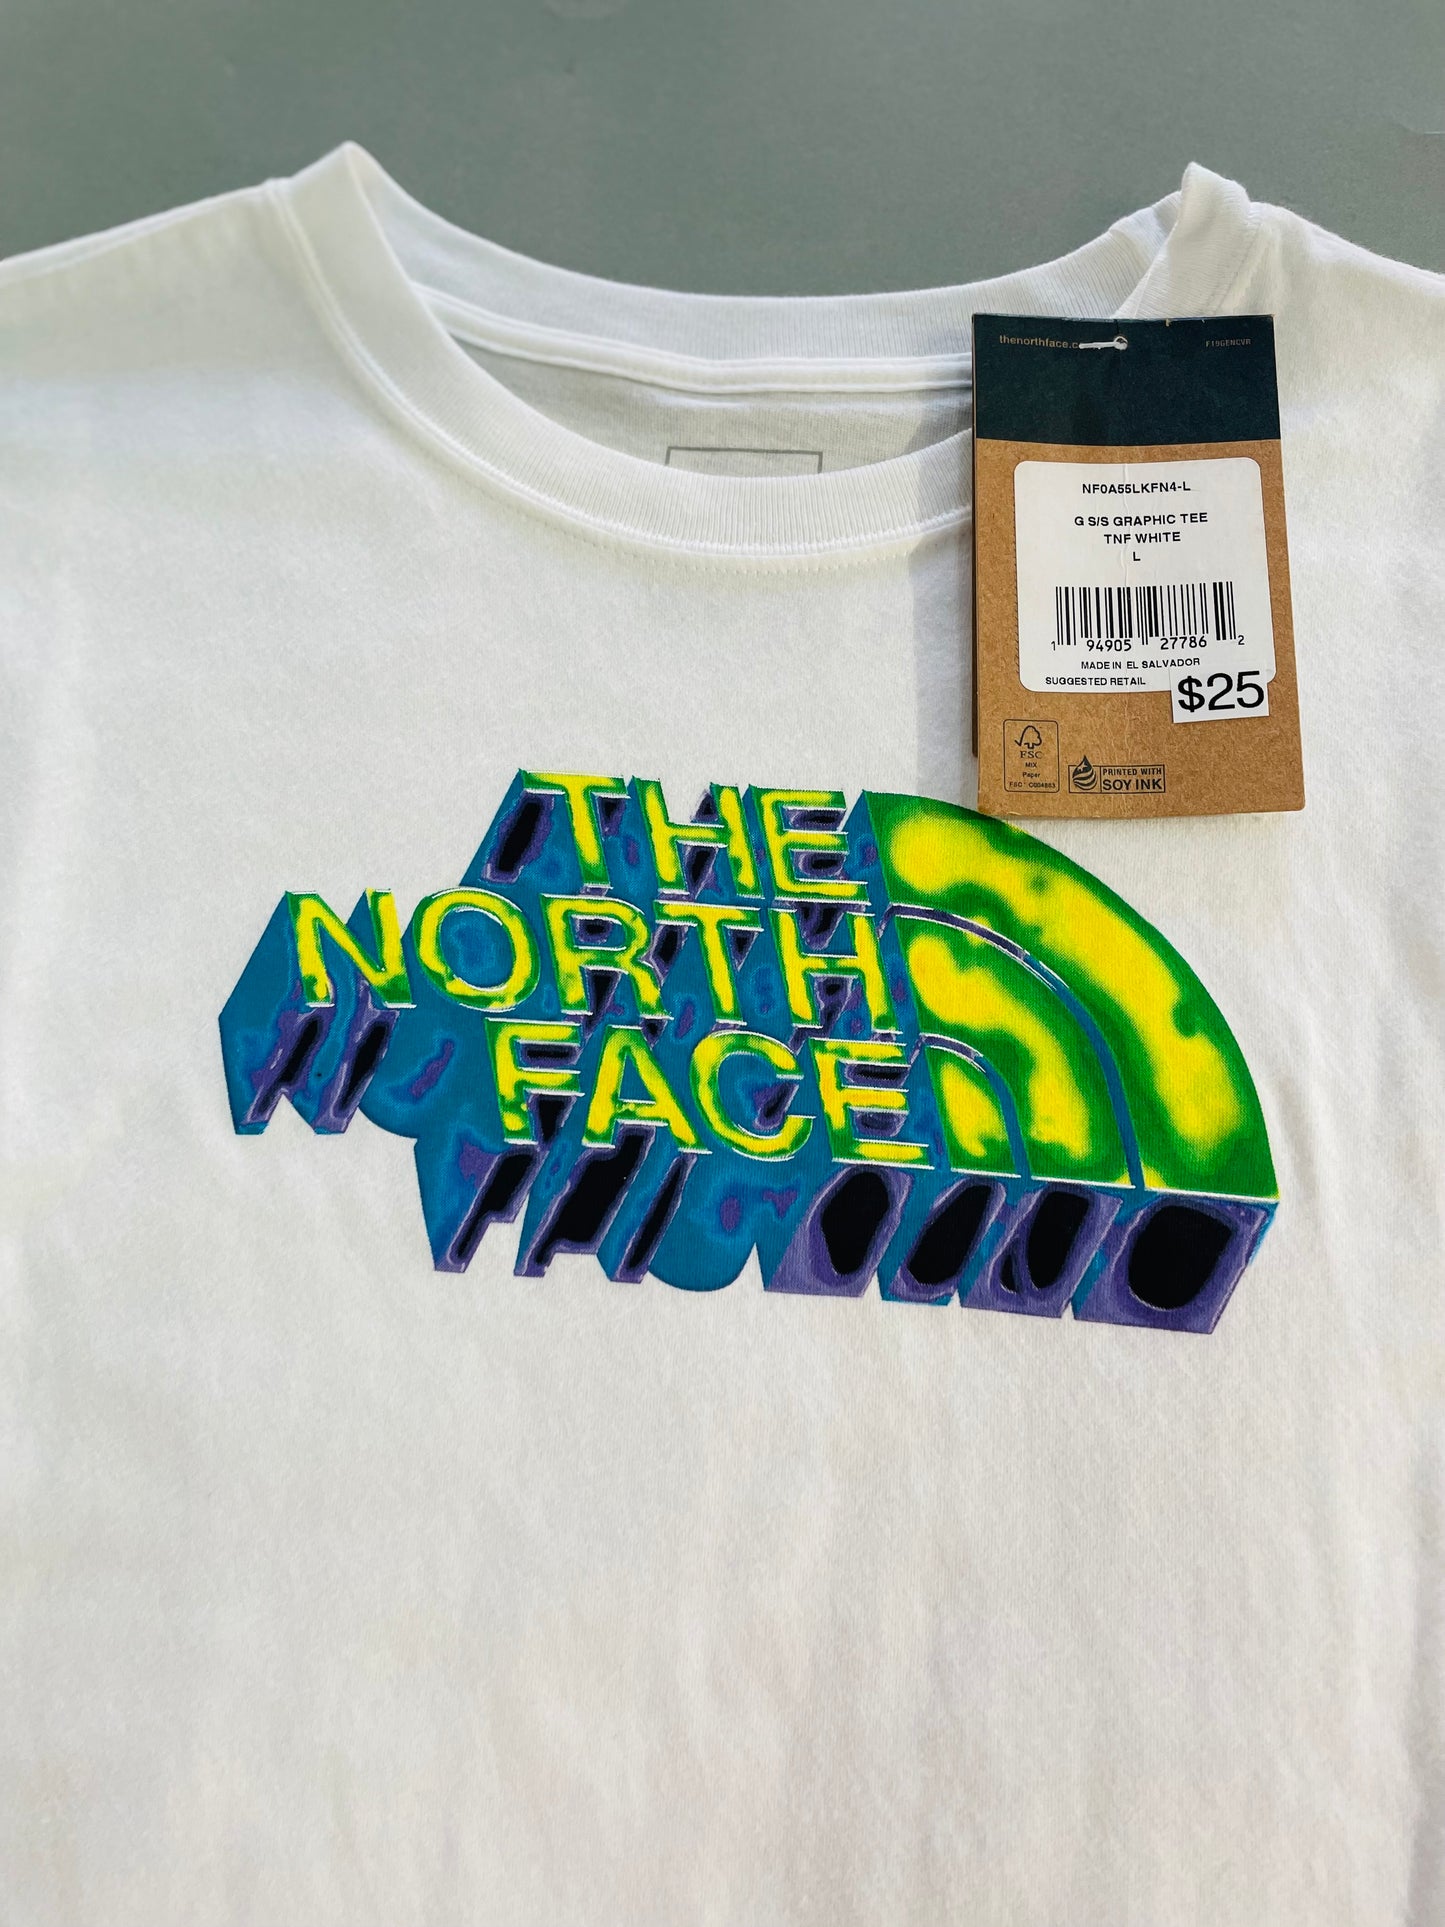 The north face kids shirt